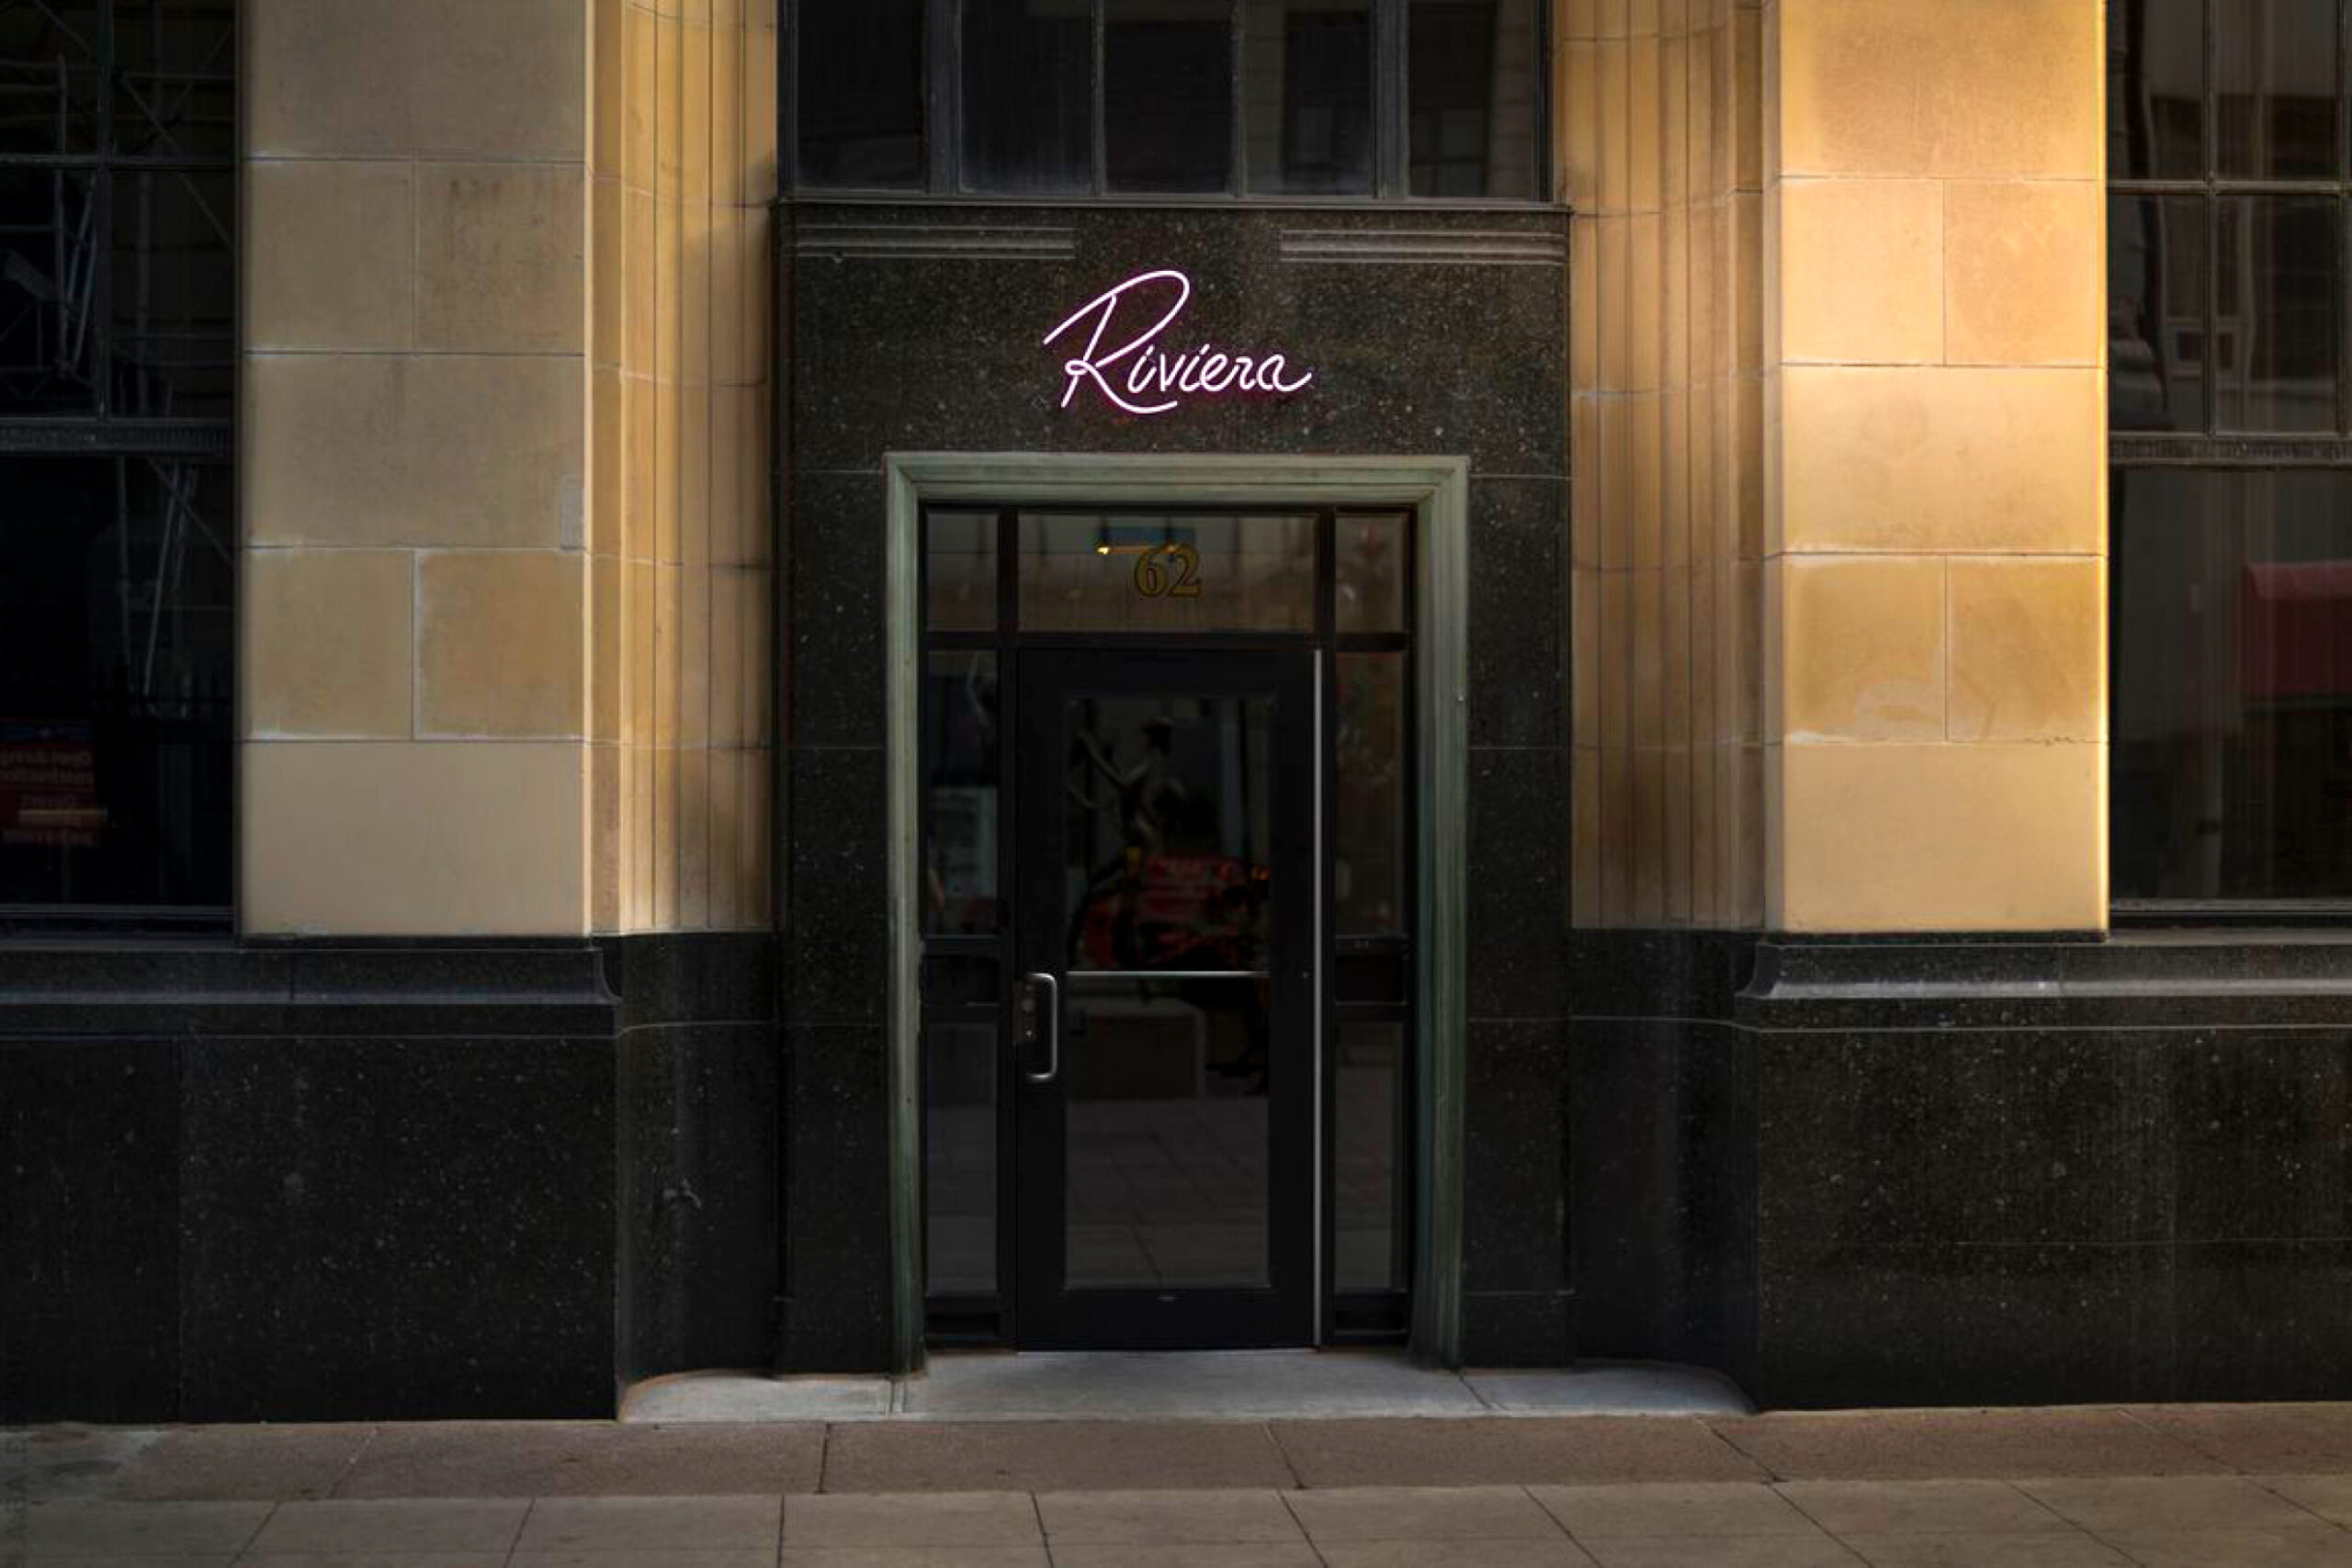 Promo image: Exterior of Riviera with neon logo sign. 